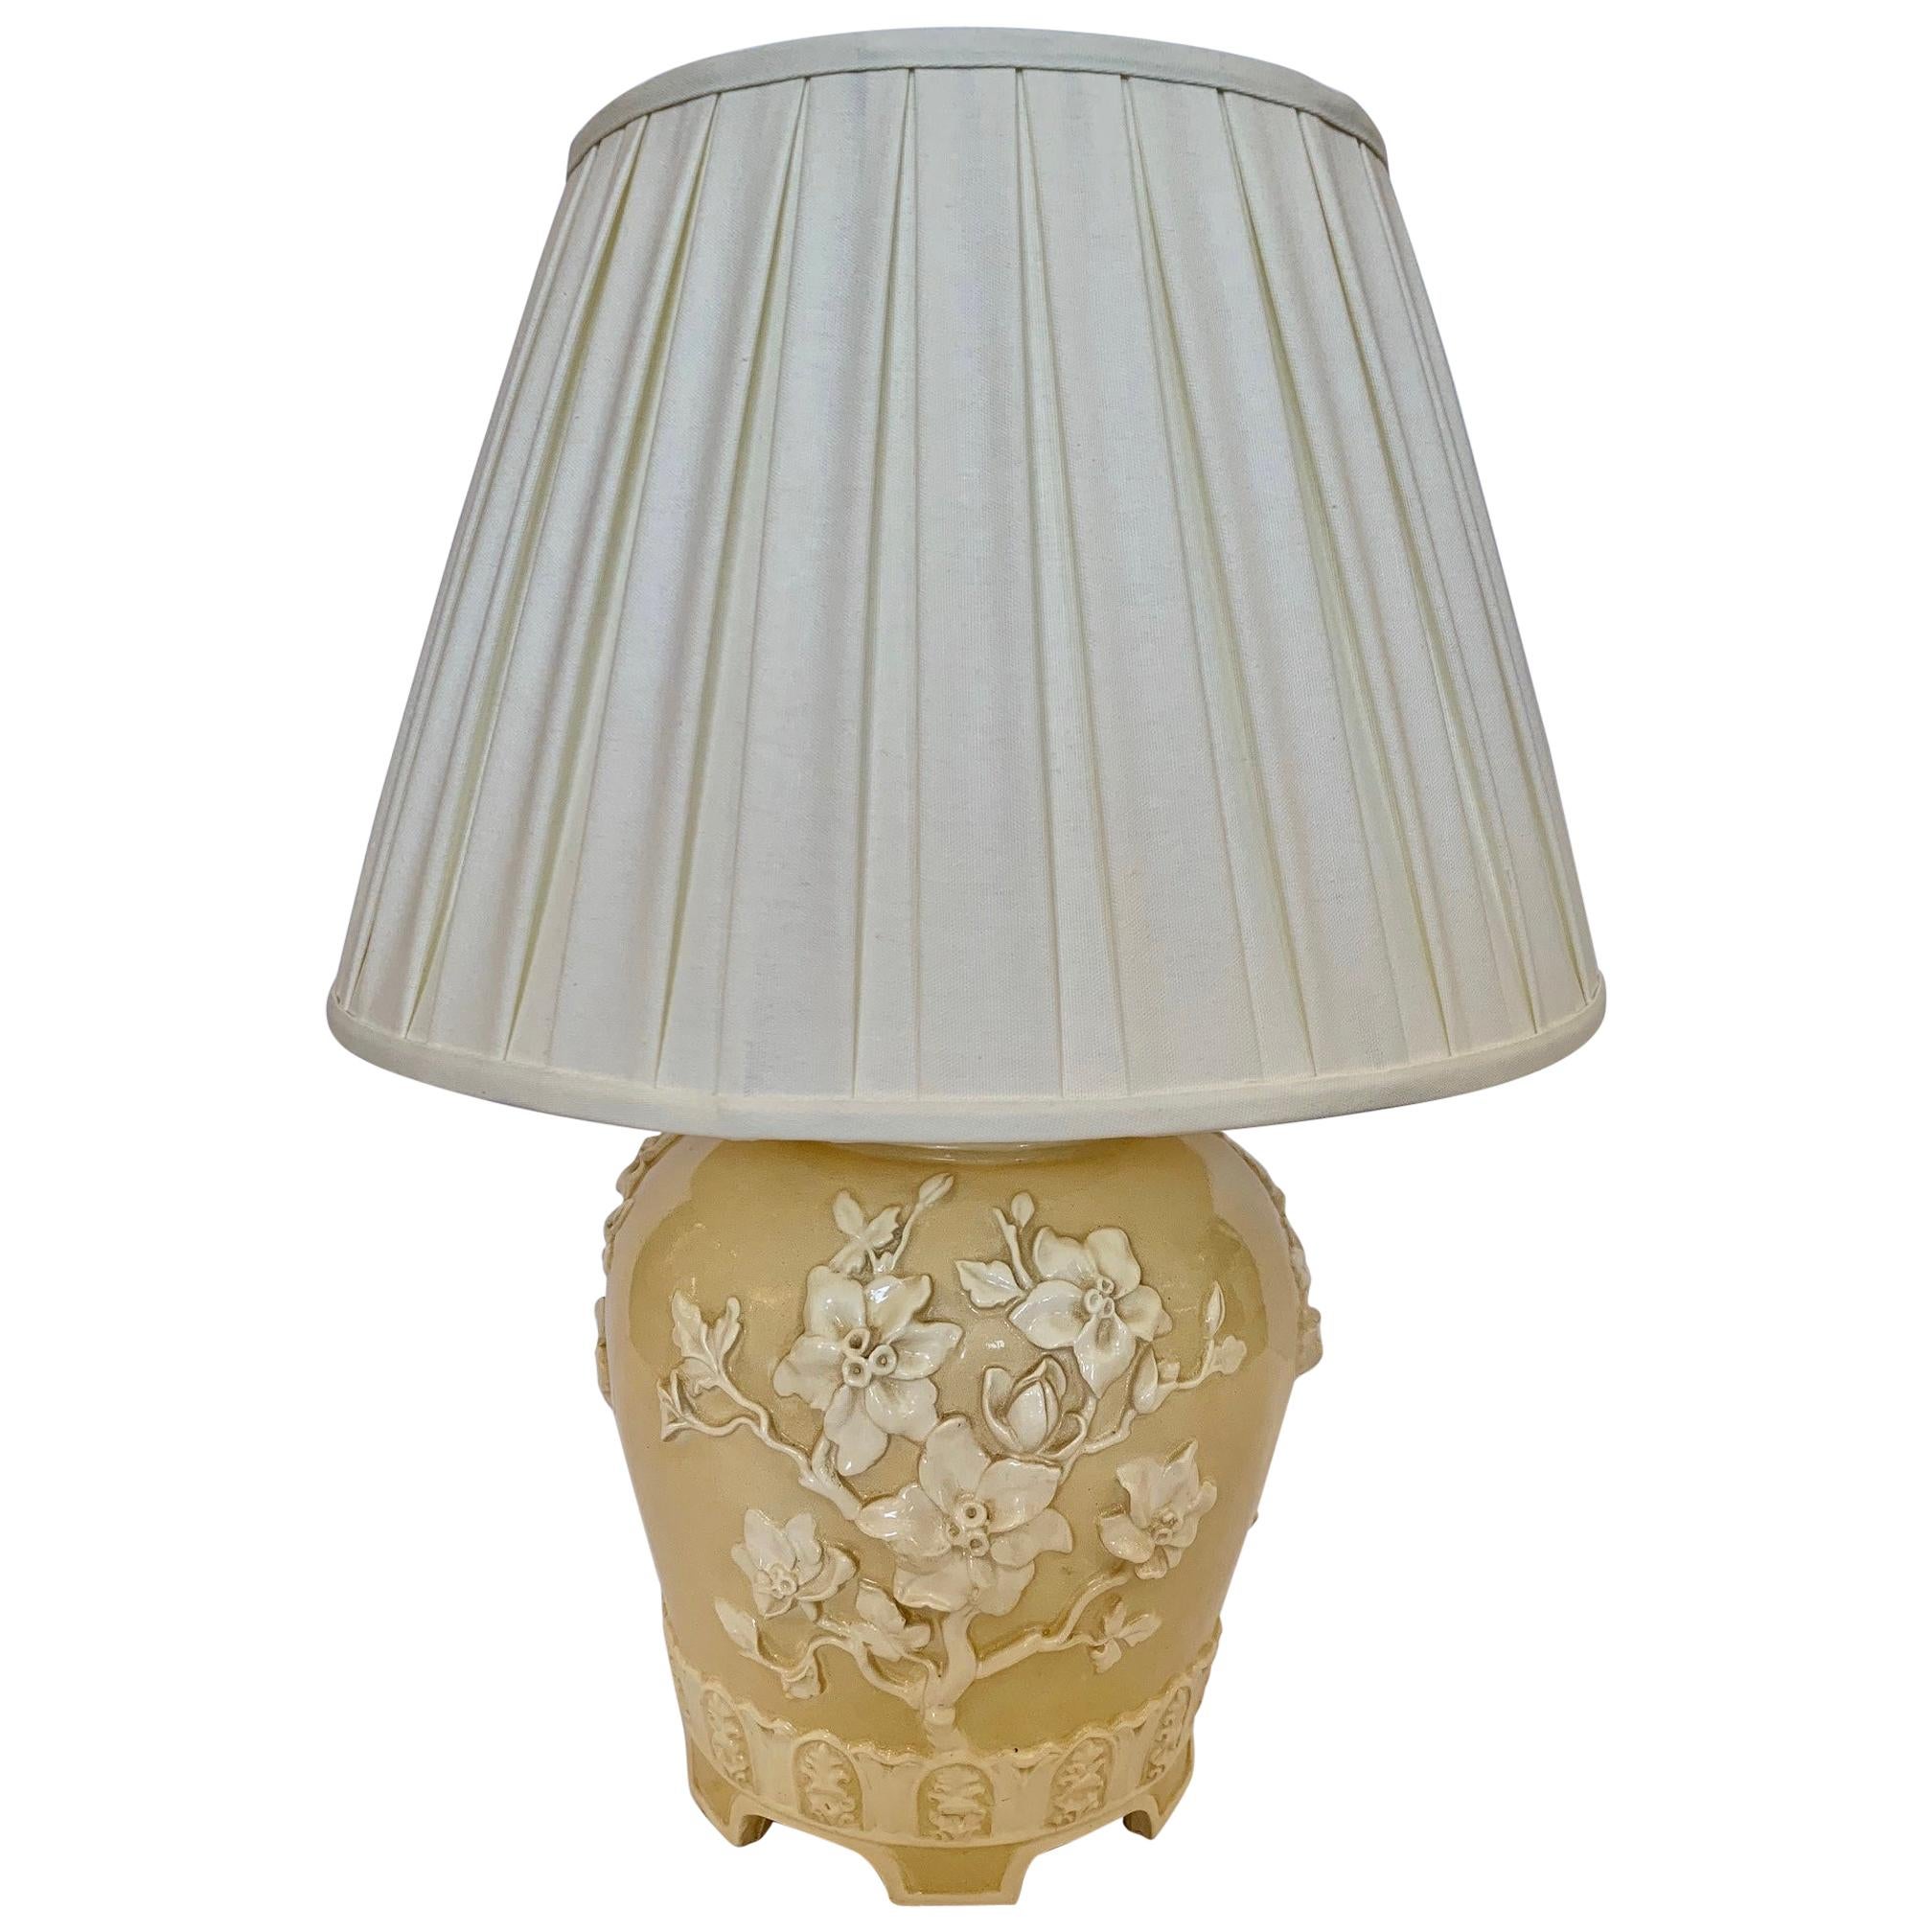 Very Pretty Large Chinoiserie Ceramic Table Lamp with Custom Shade